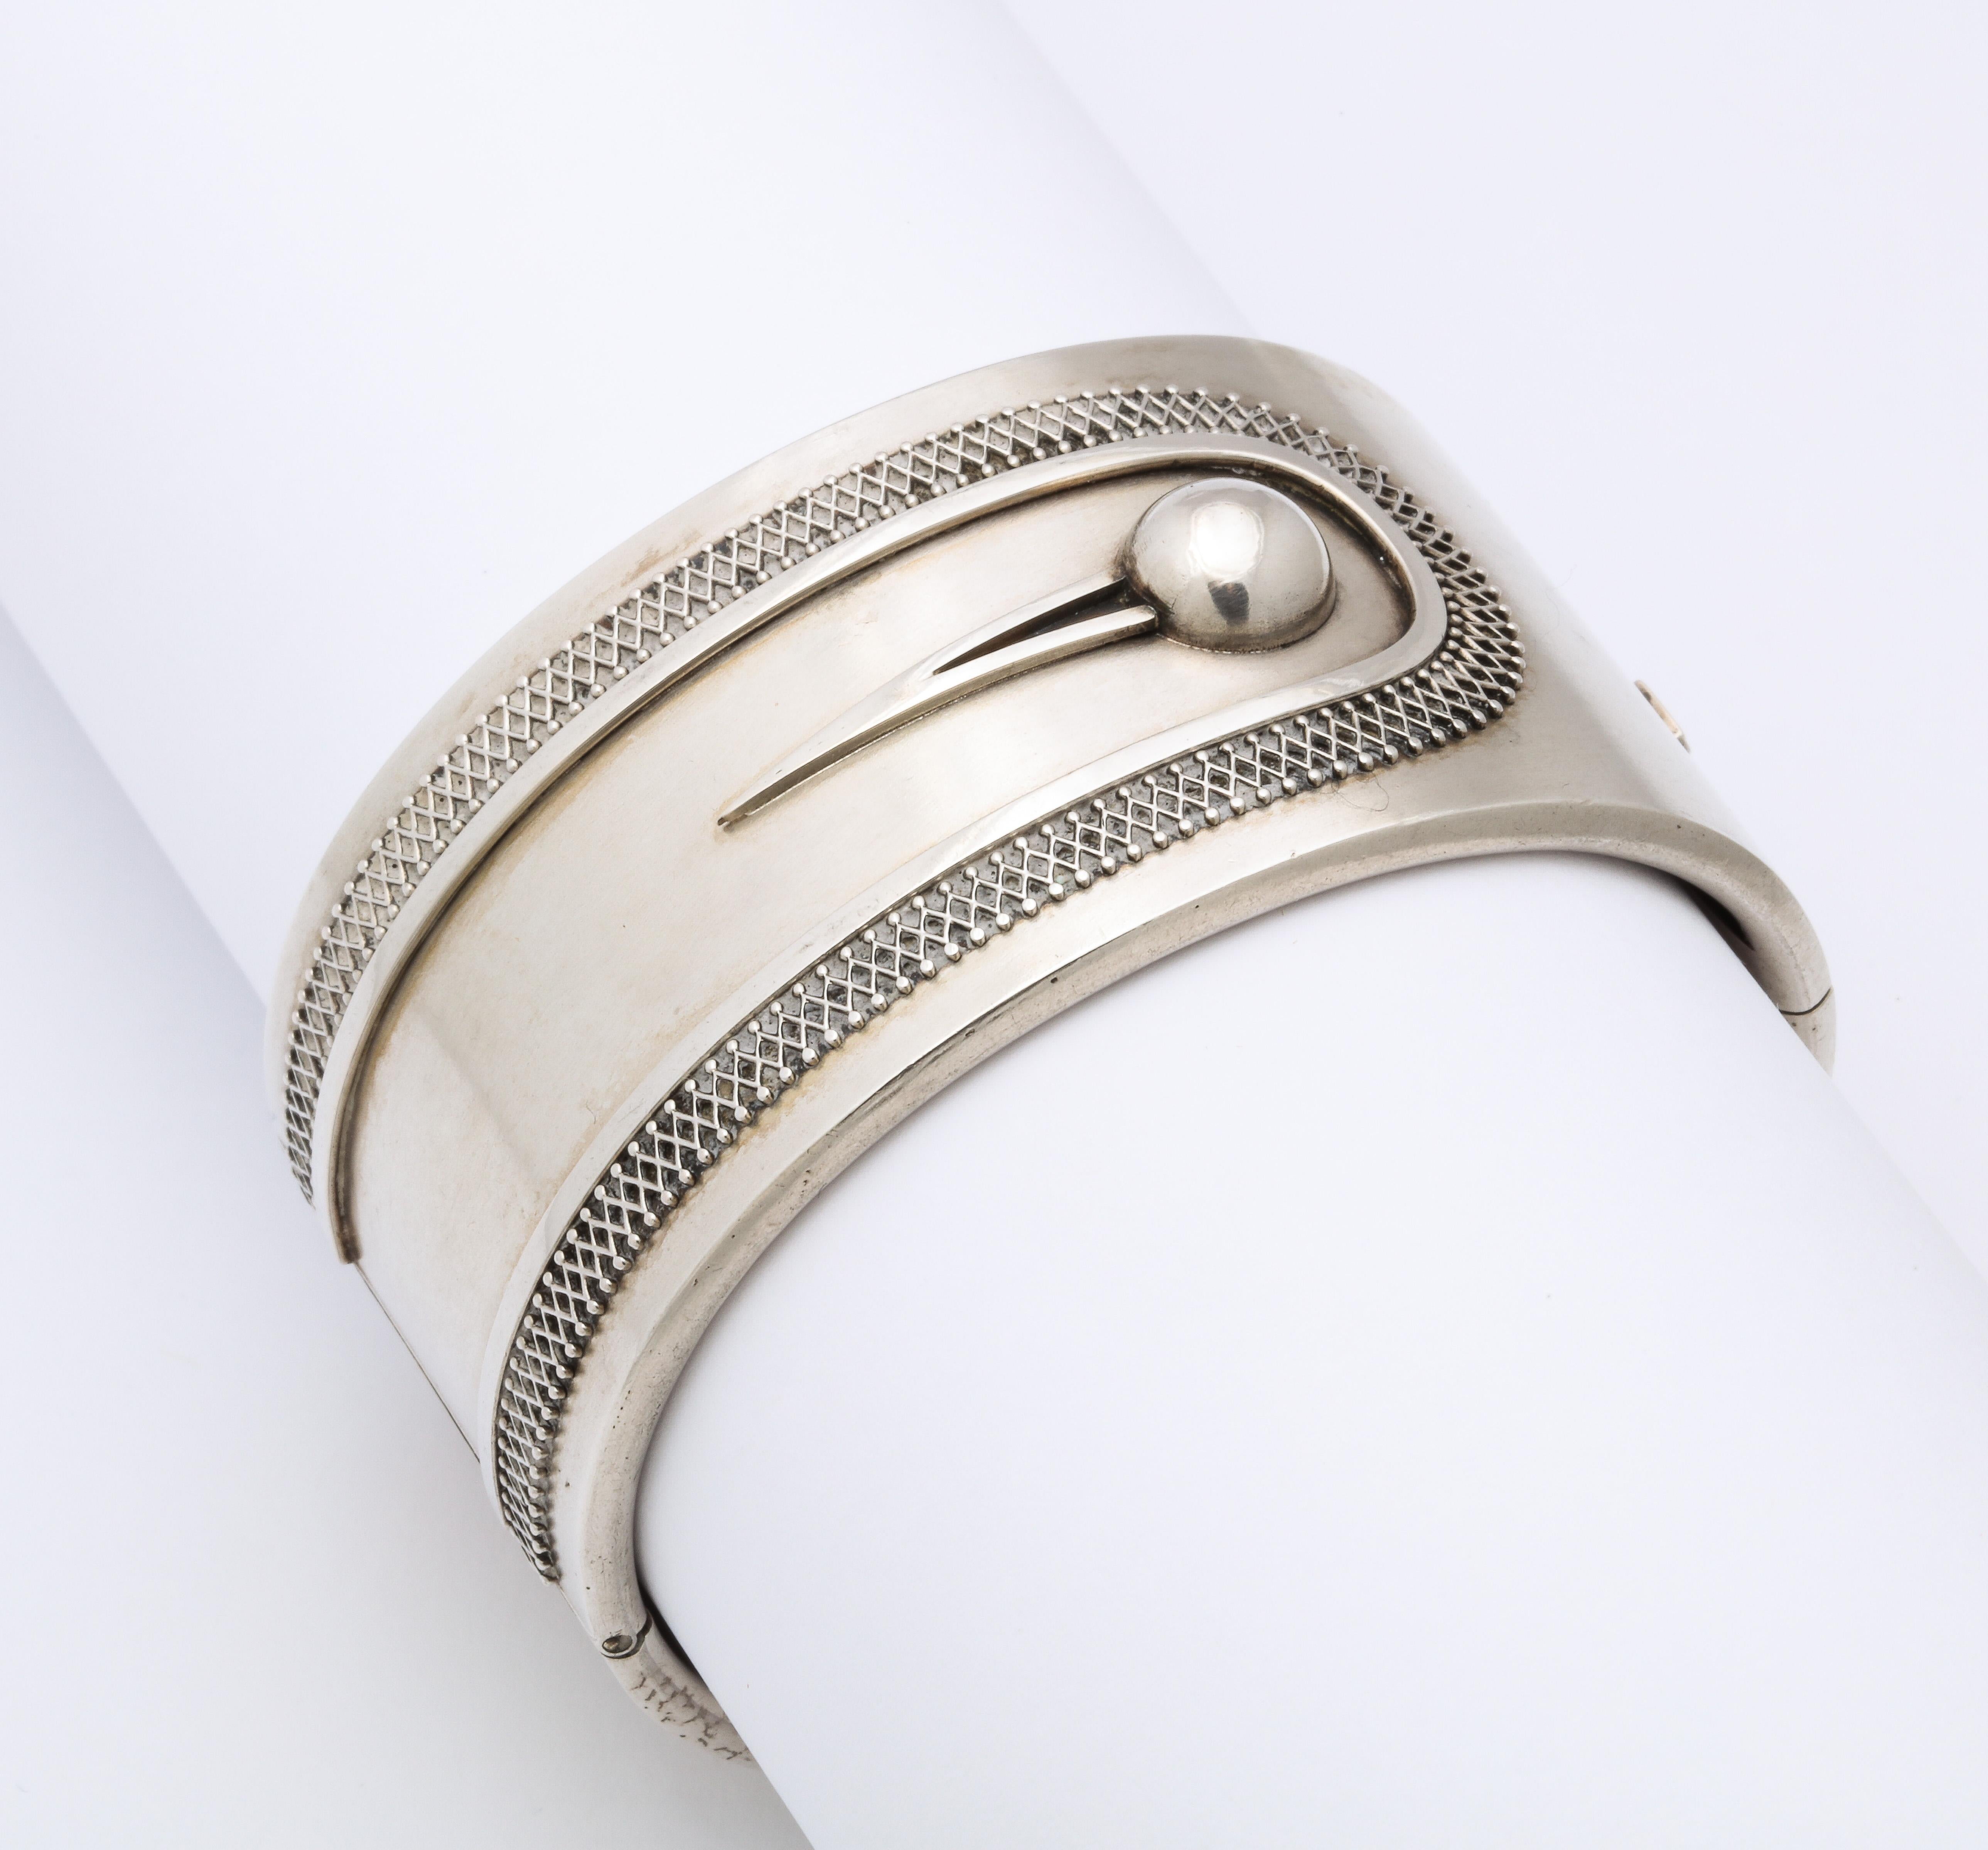 The simplicity of this silver button cuff bracelet makes the contrast in texture a standout. Diamond formed architectural wire work surrounds the button strap. I fell in love with the positive negative space that for some reason gives pleasure every